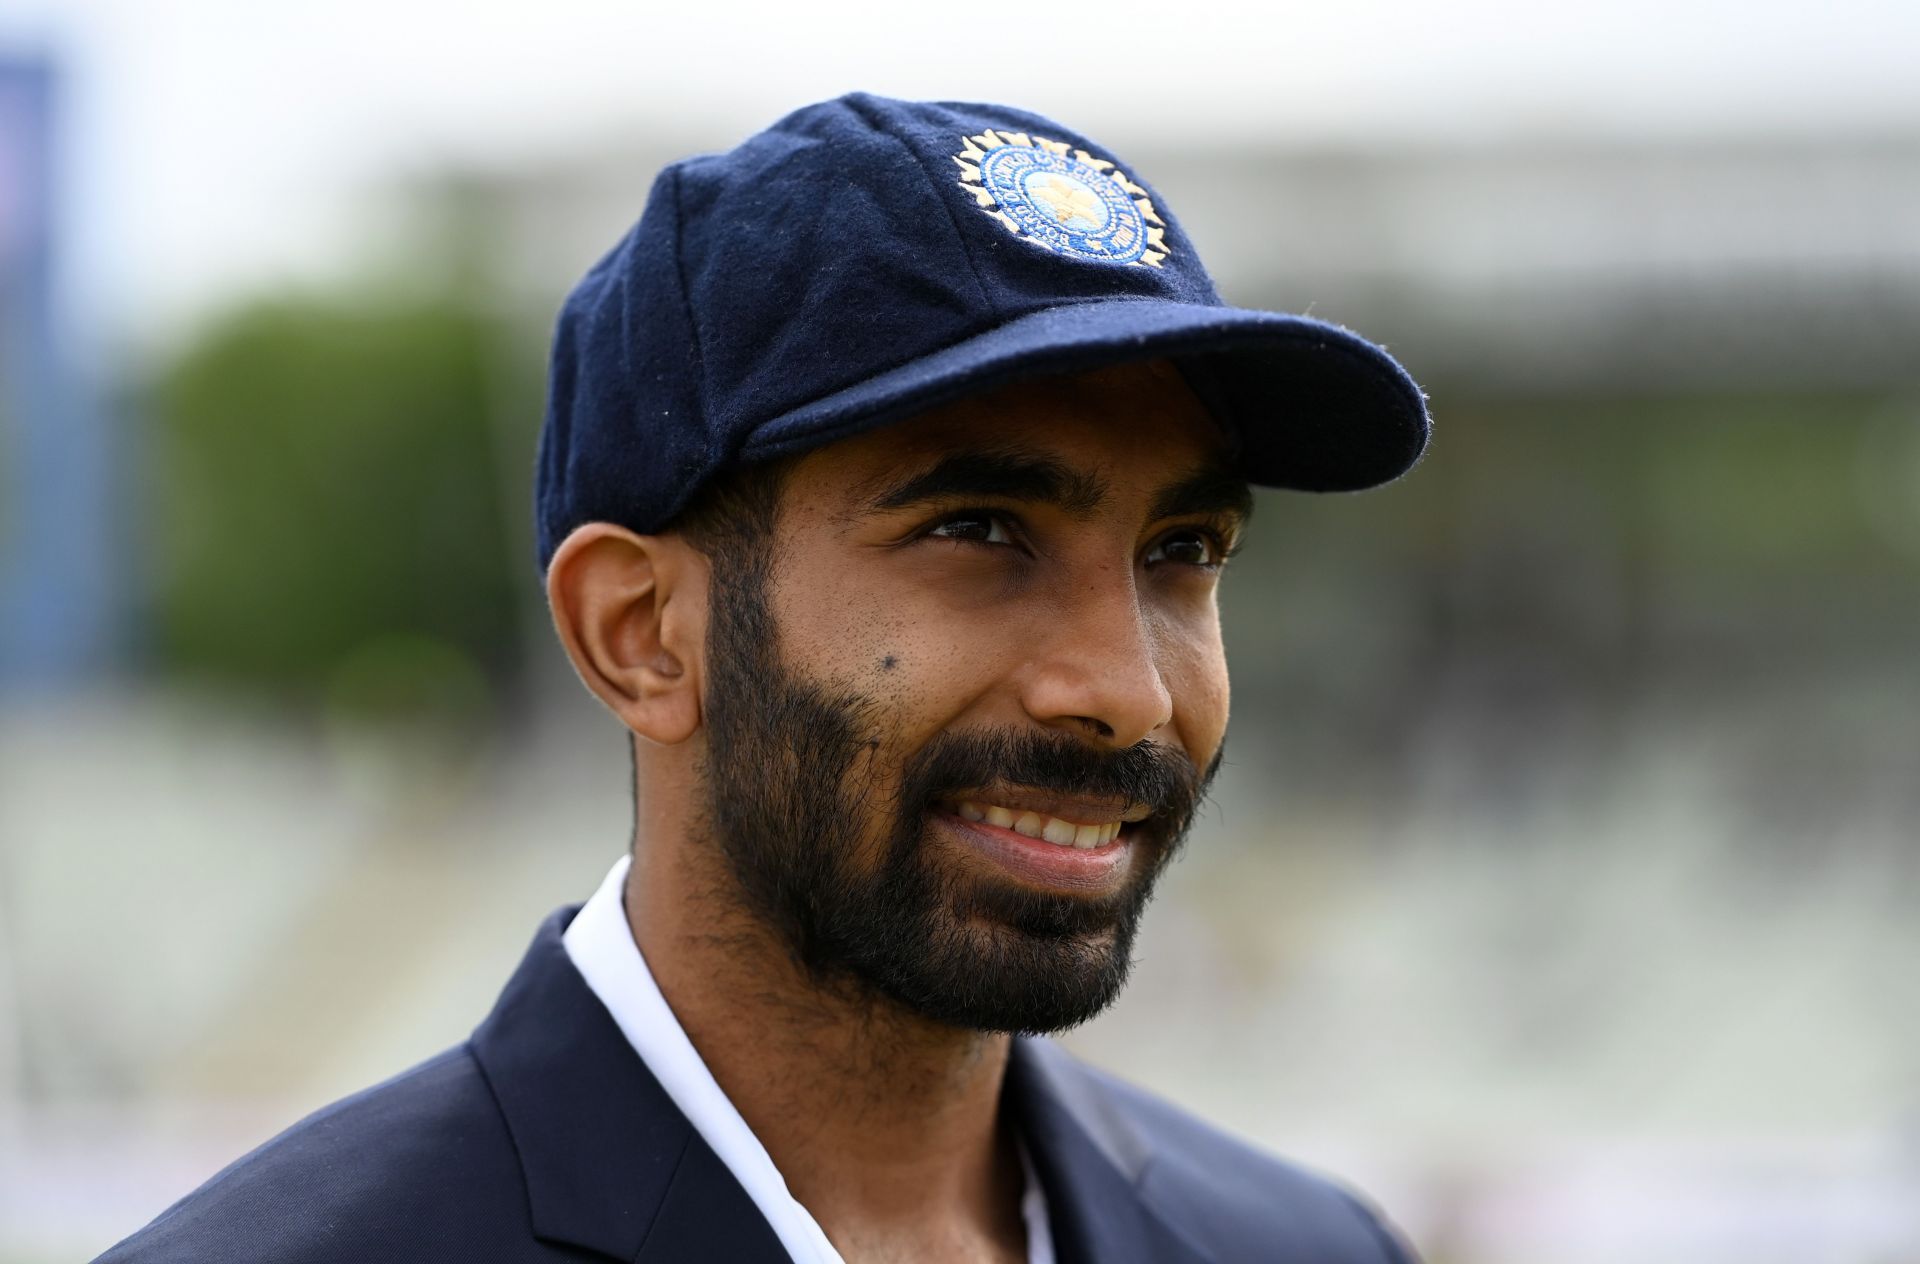 Jasprit Bumrah lost his first Test as Indian captain.